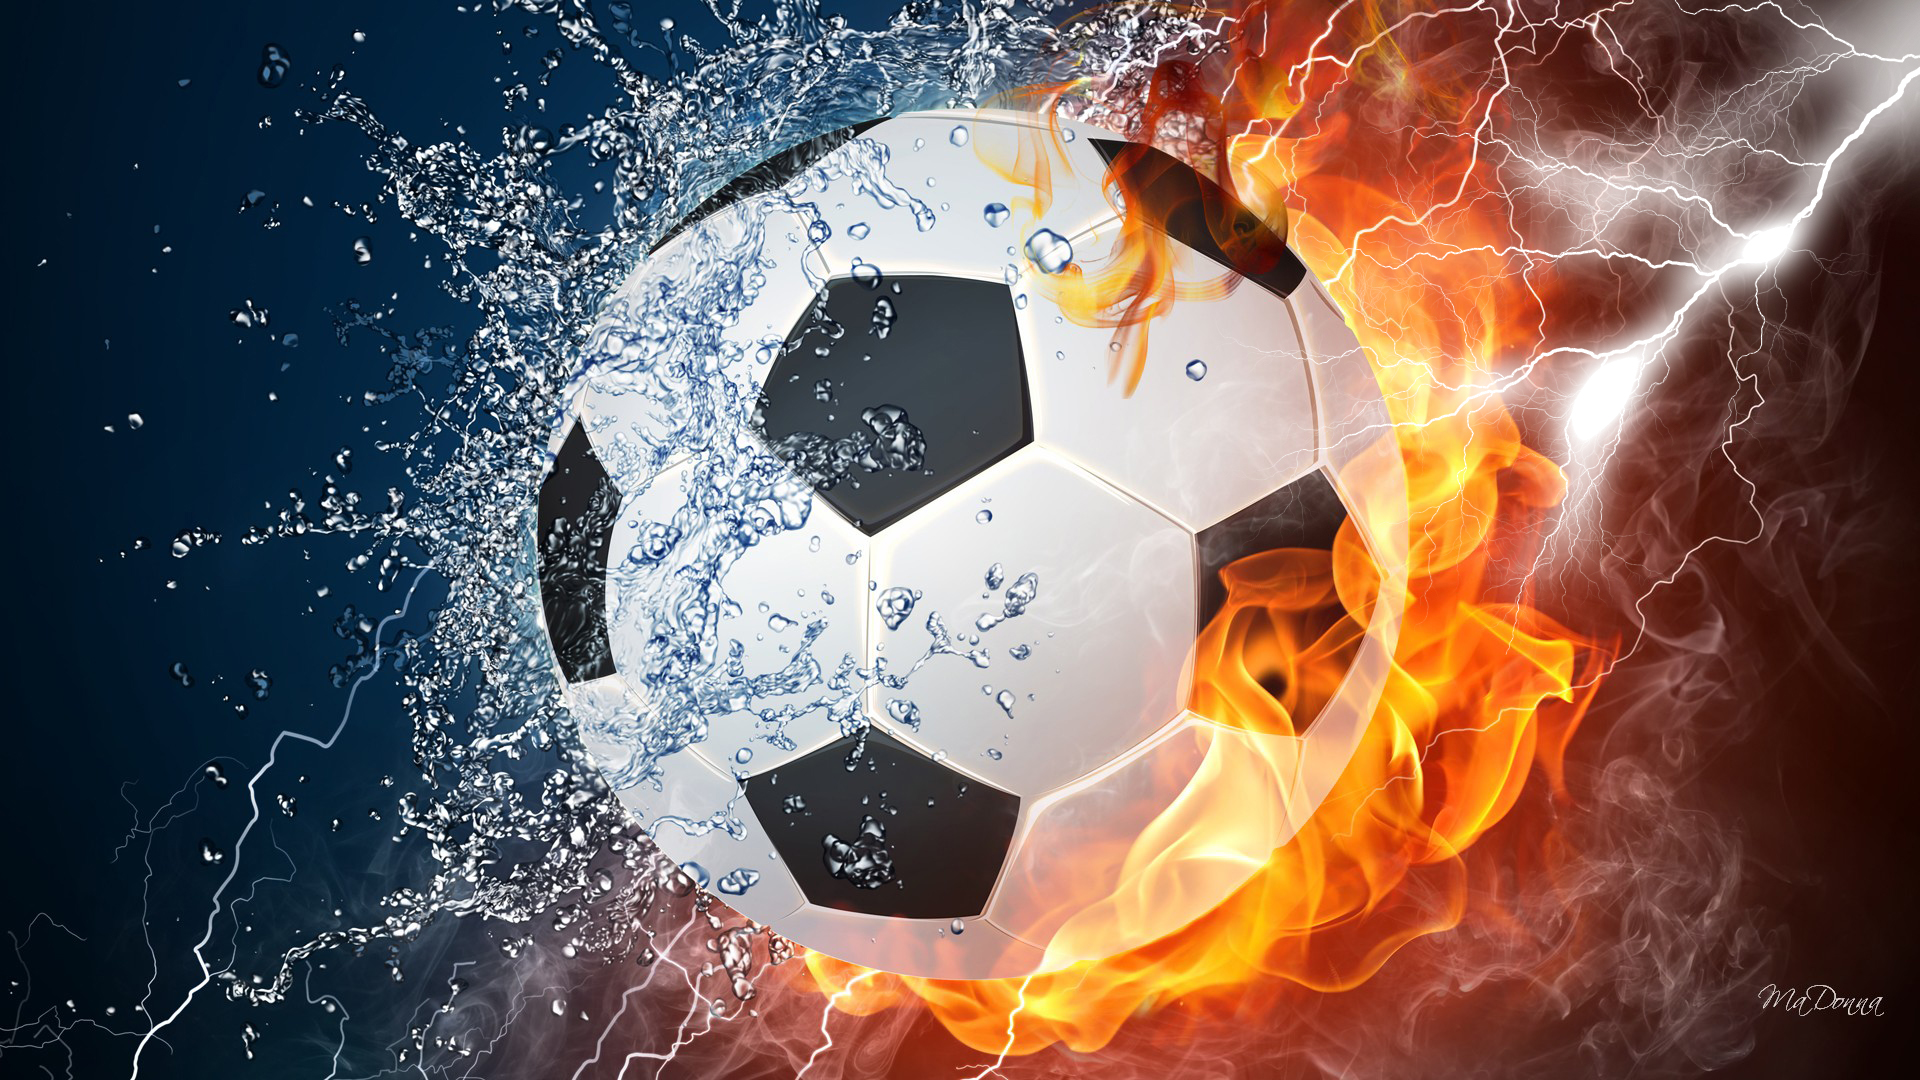 Cool Soccer Wallpaper Pictures To Pin